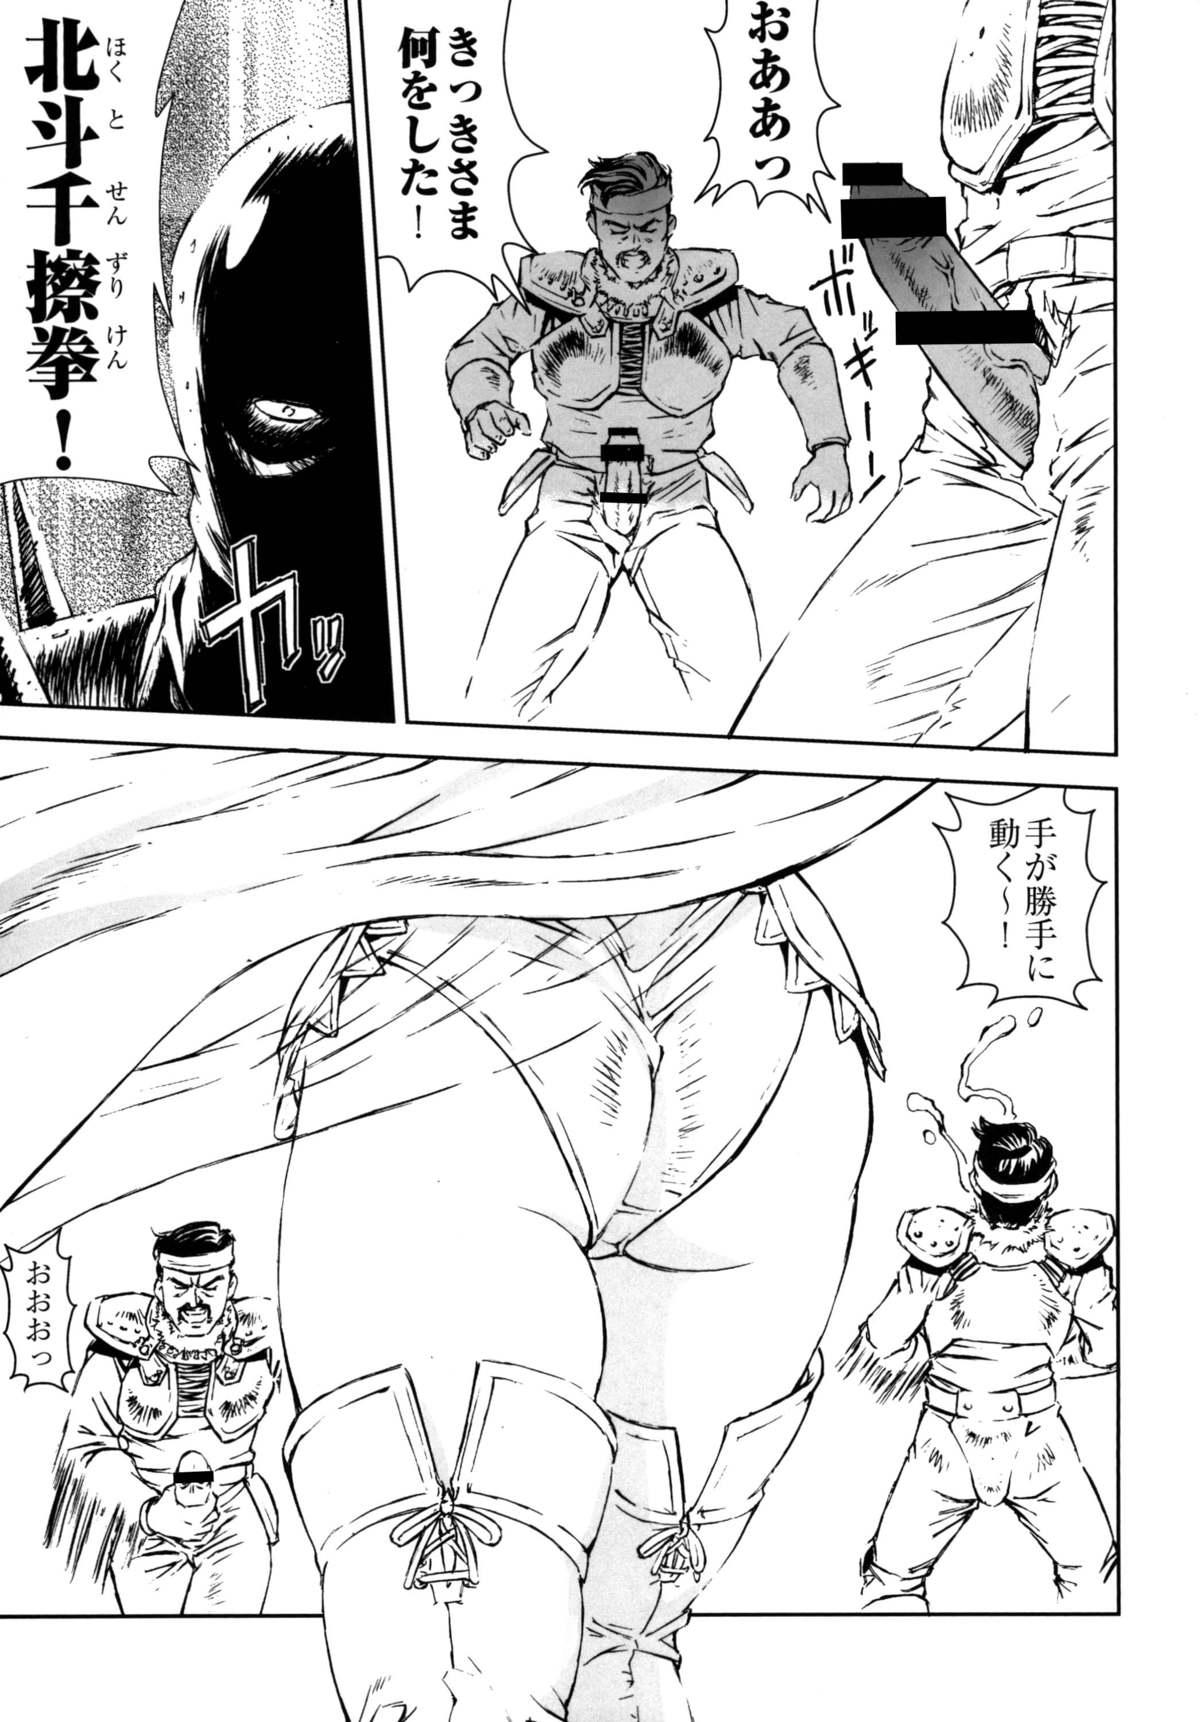 Camgirl HOT BITCH JUMP 2 - Kochikame Fist of the north star Reverse - Page 6